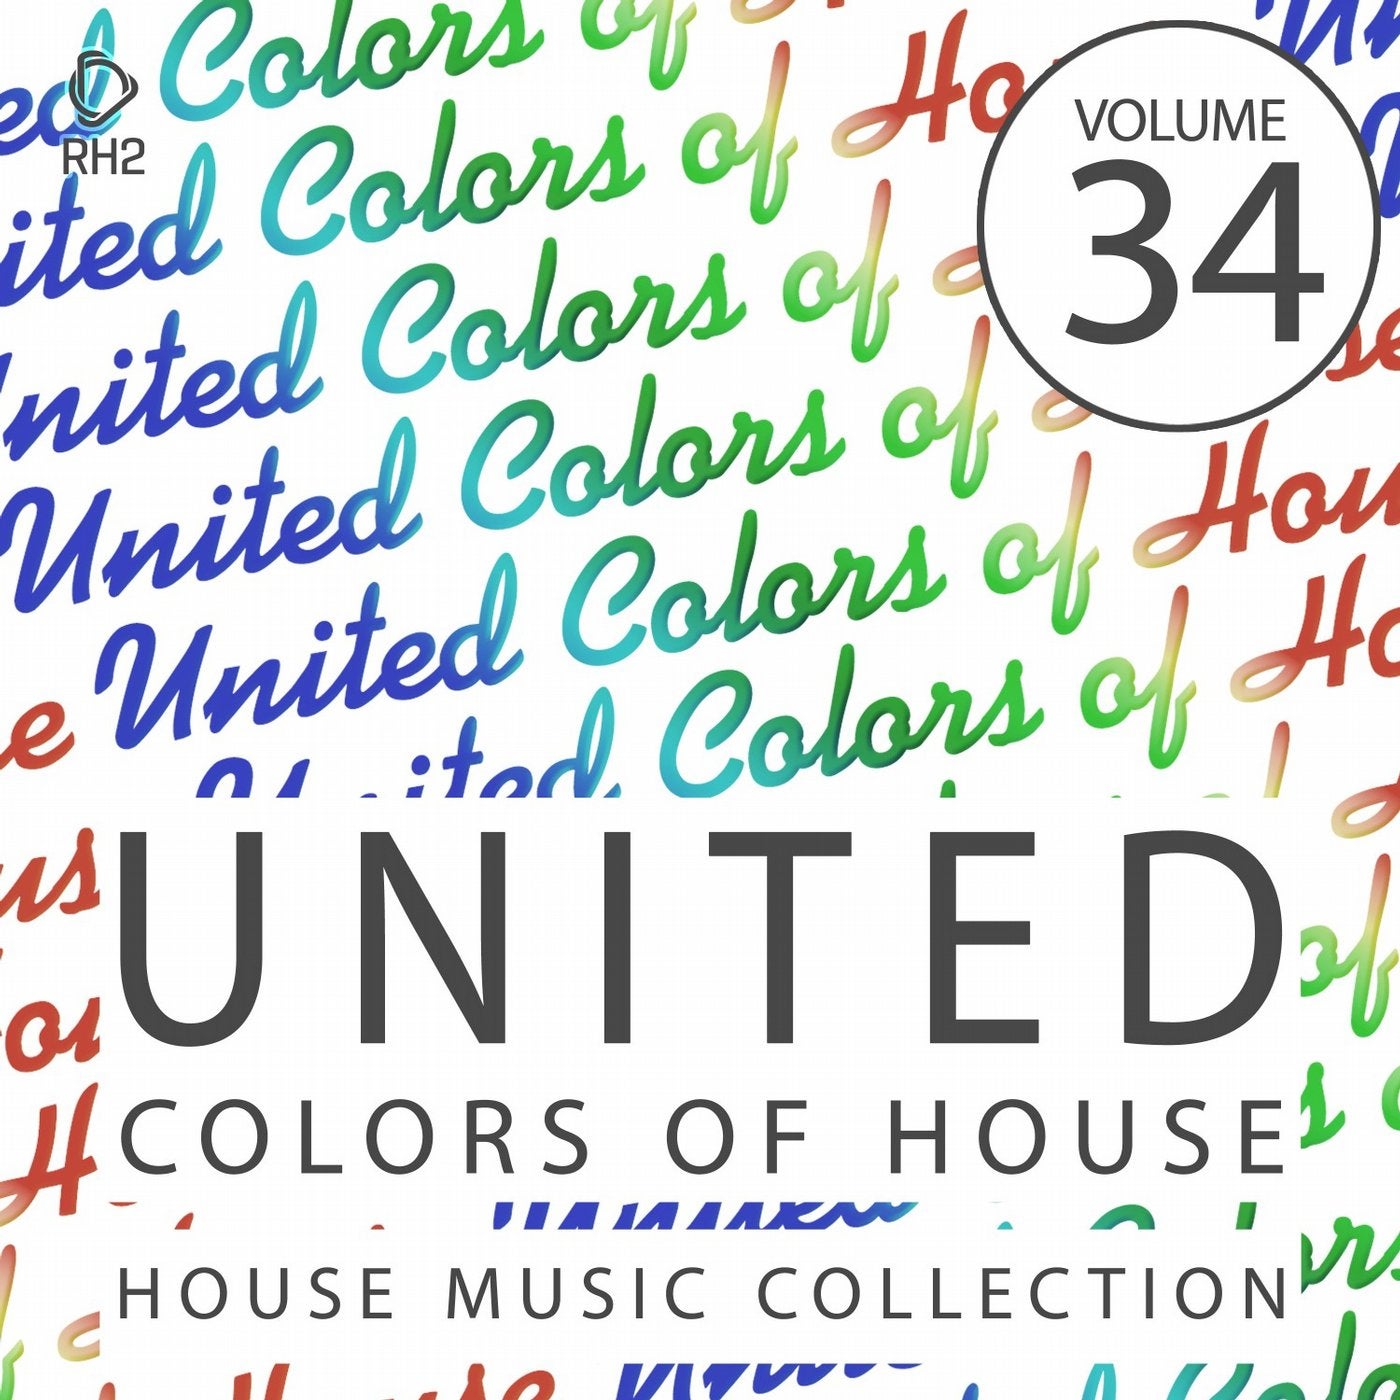 United Colors Of House Vol. 34